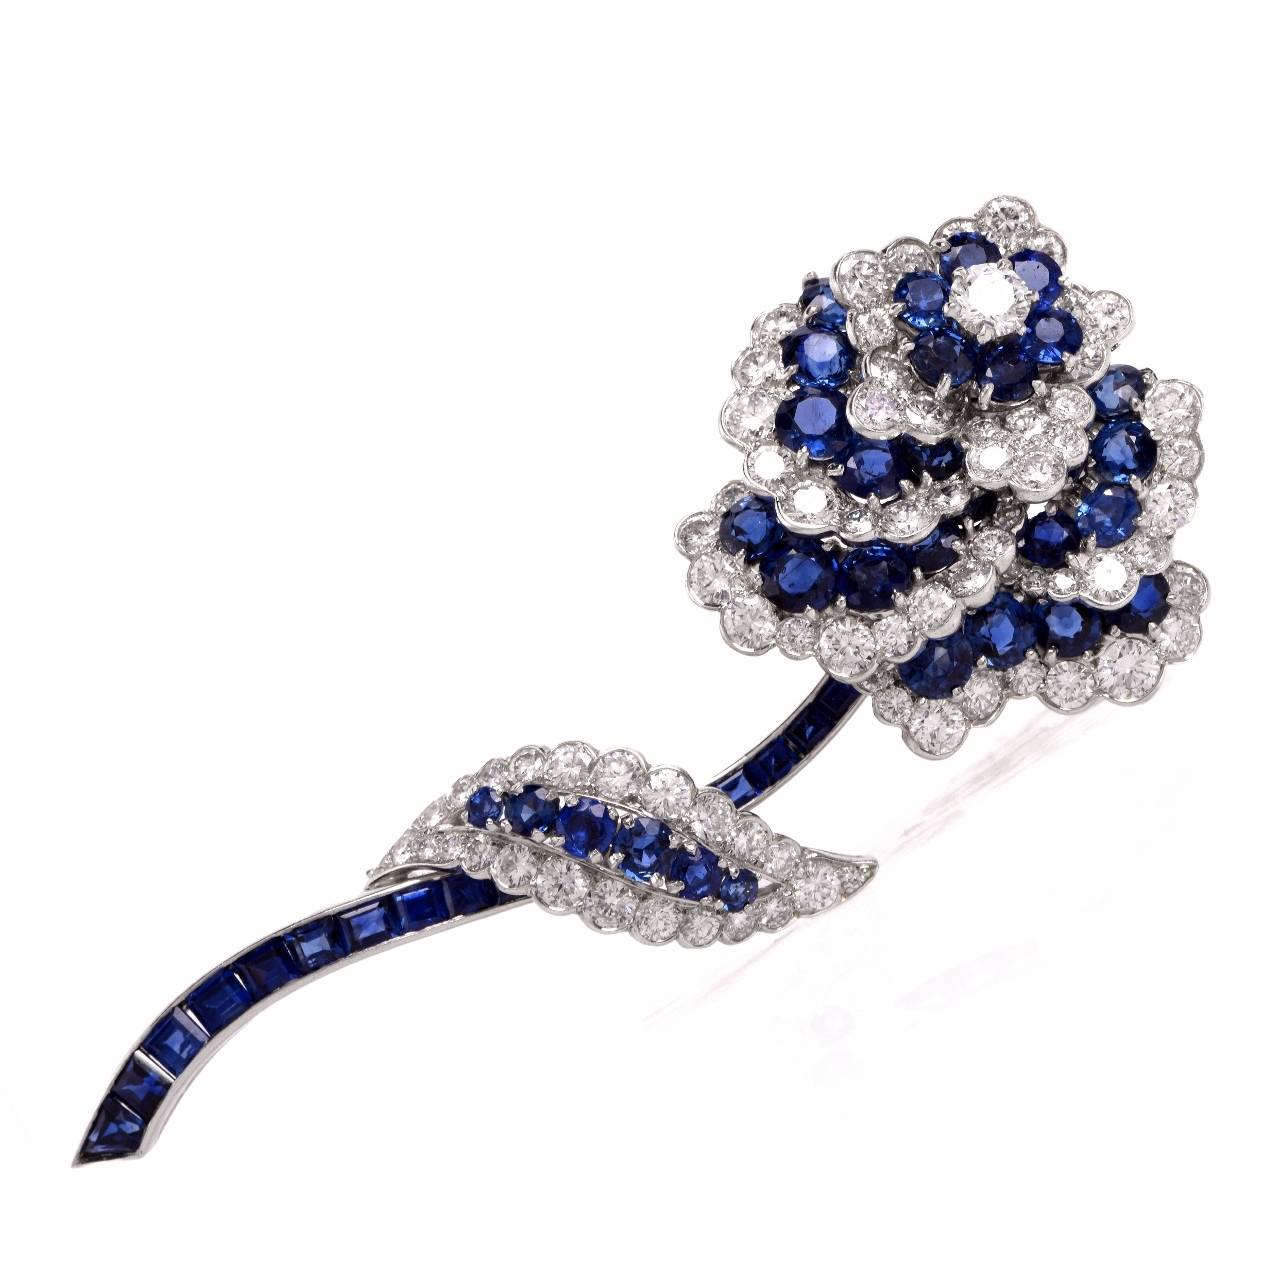 This Impressive  Van Cleef & Arpels diamond  and  blue sapphire floral lapel brooch  of breath-taking aesthetic beauty and artistic craftsmanship  is from 1960's  late vintage era, resplendent in 5.22 cts of sparkling round brilliant-cut